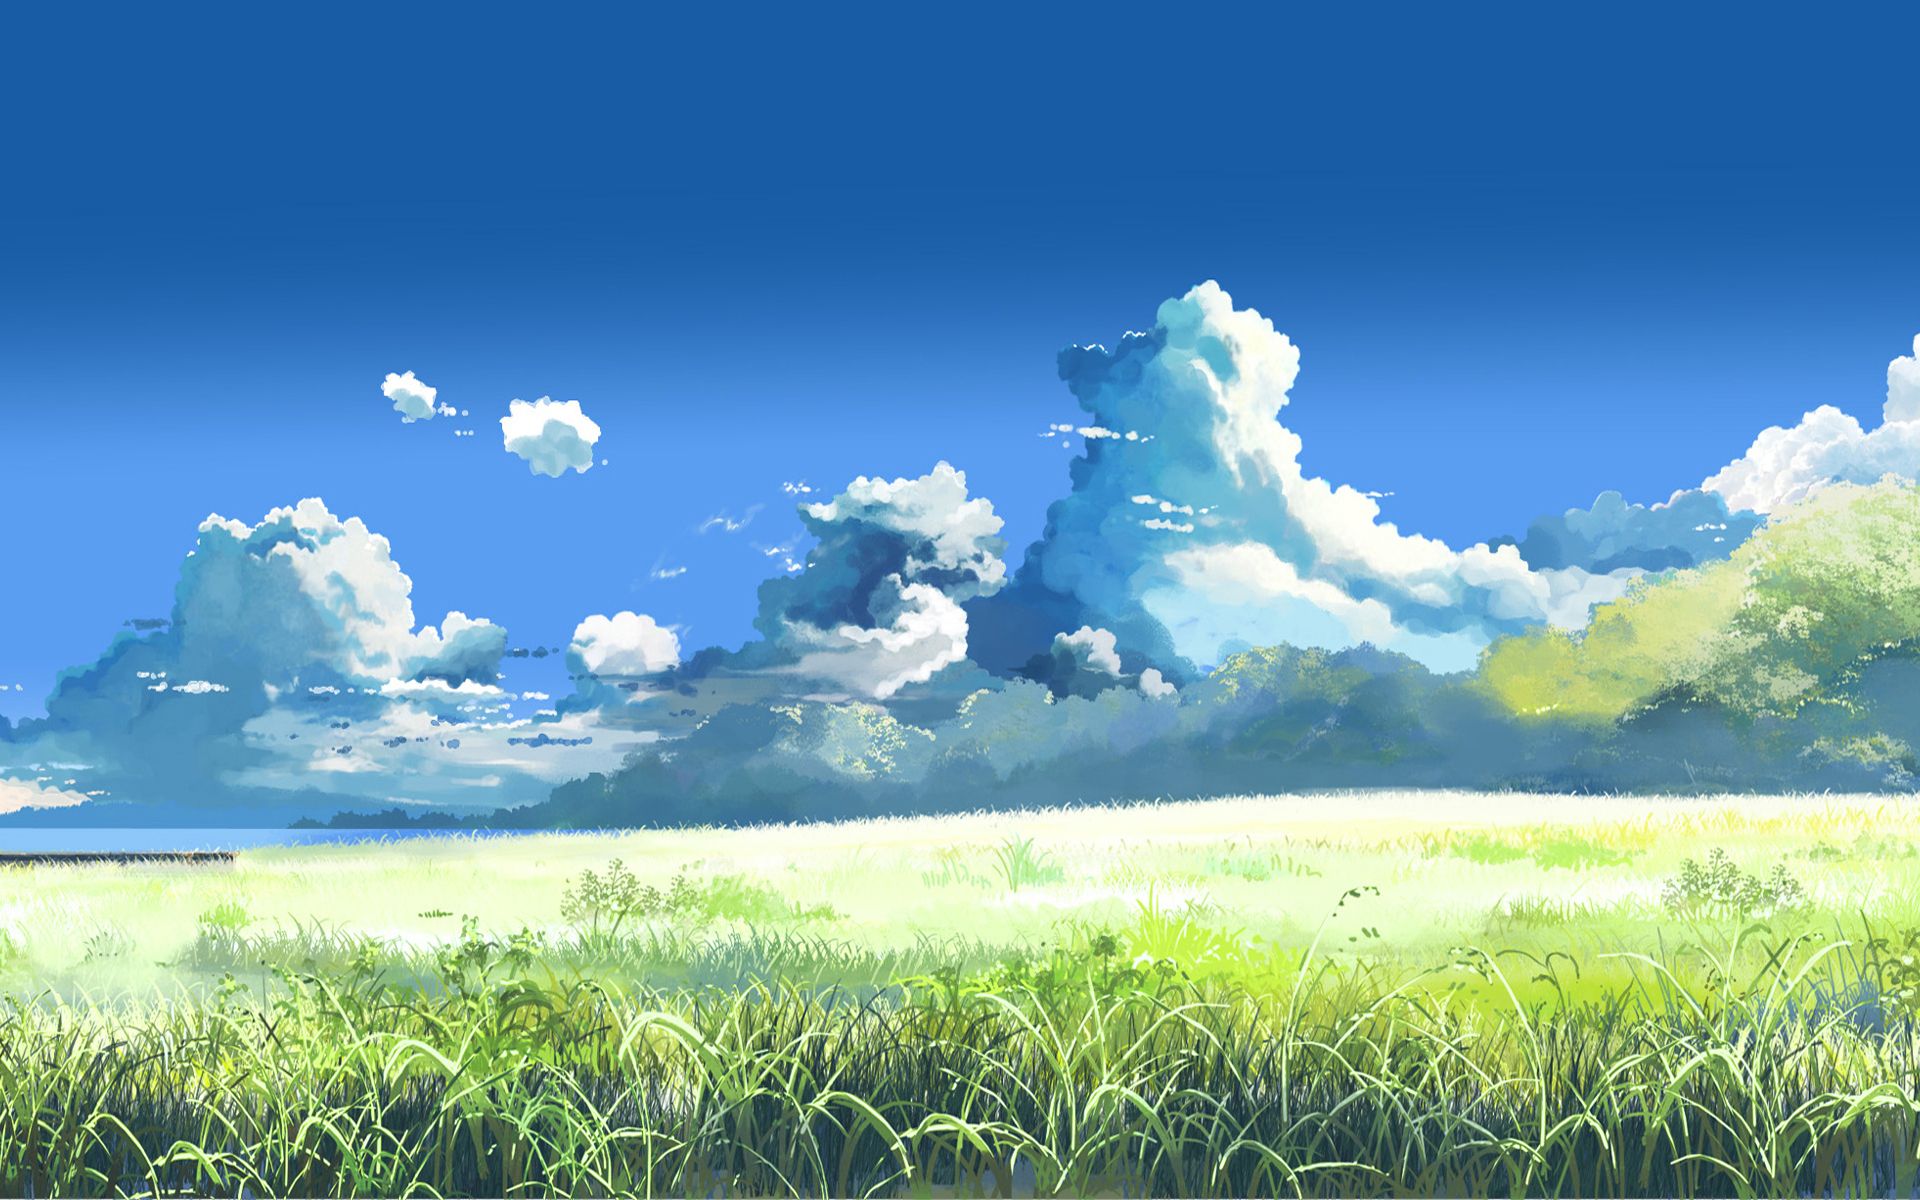 Anime Summer Scenery Wallpapers